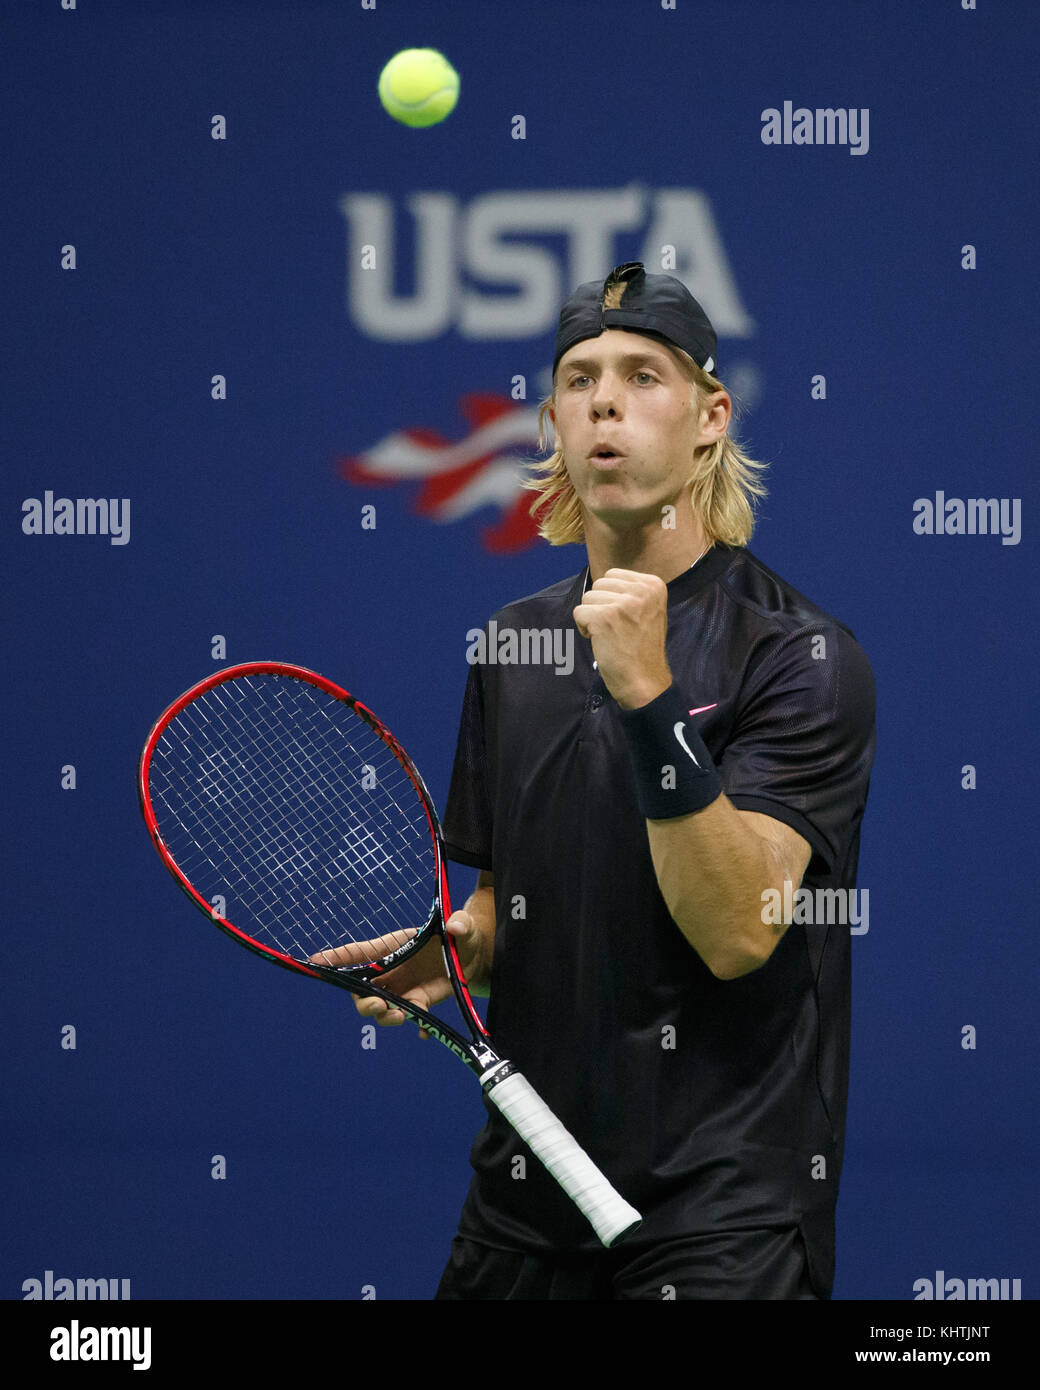 Canadian tennis player DENIS SHAPOVALOV (CAN) celebrates match point in US Open  2017 Tennis Championship, New York City, New York State, United States  Stock Photo - Alamy